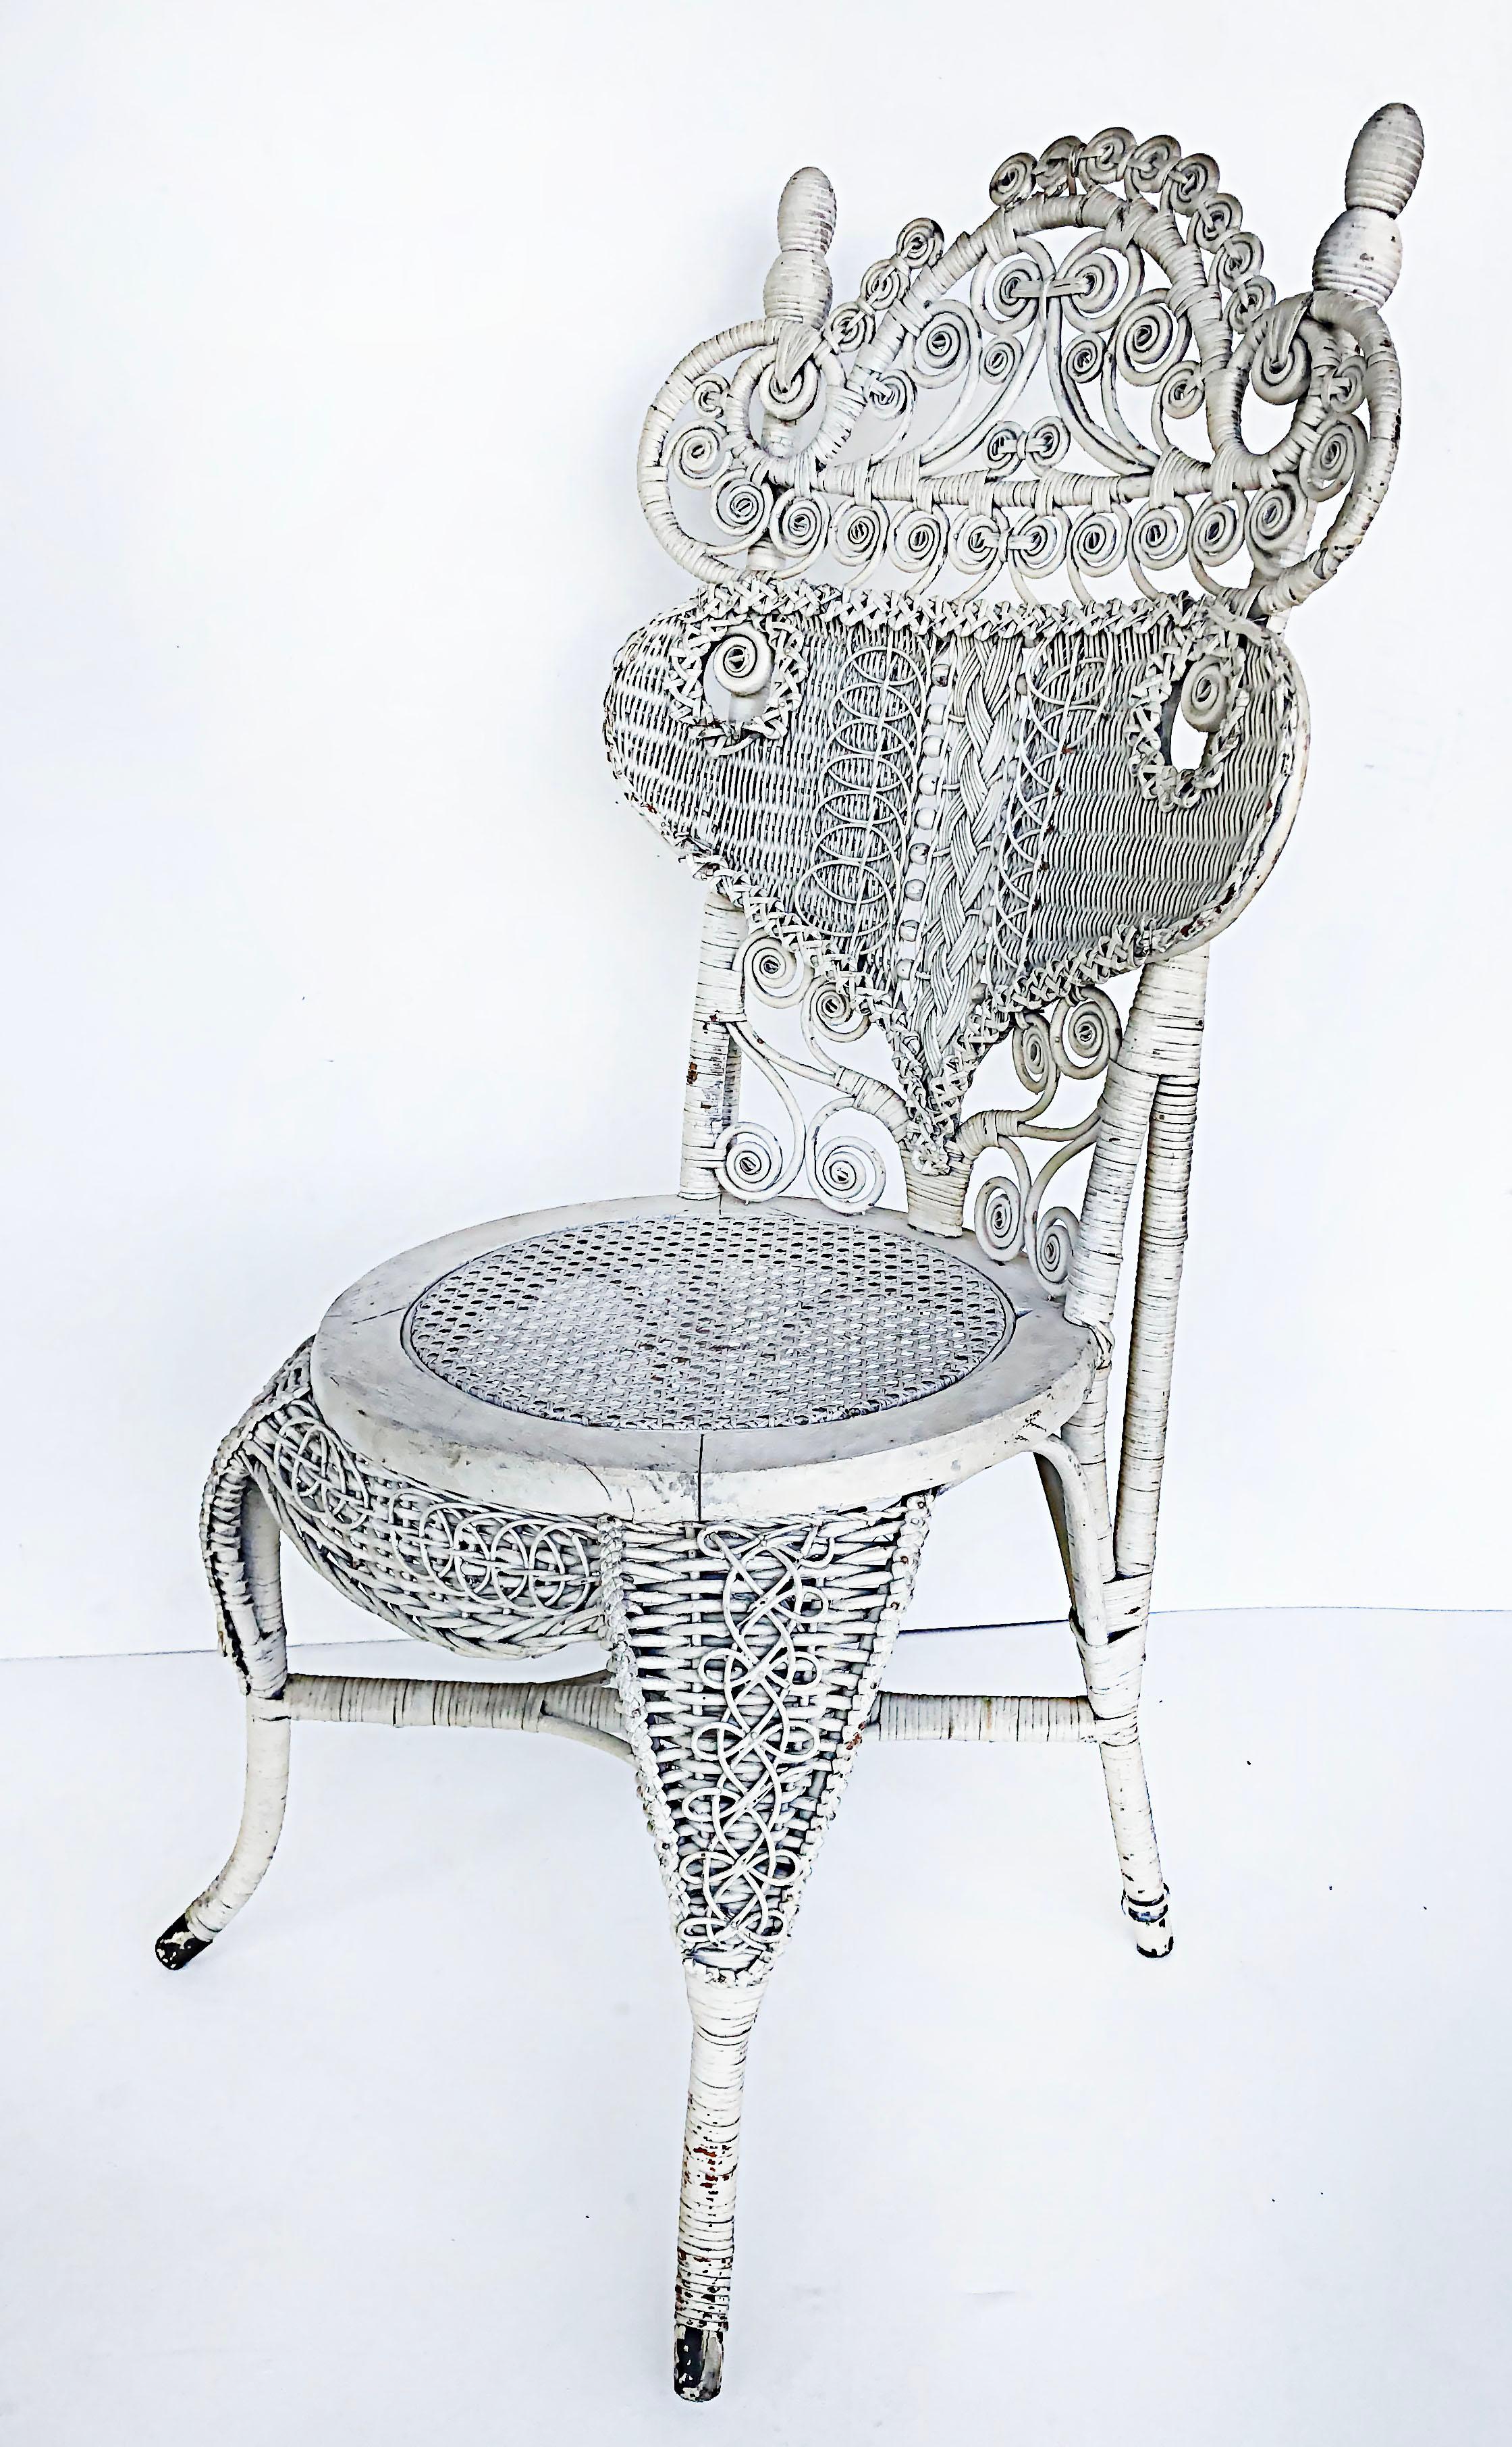 Ornate white painted Victorian Wicker chair 

Offered for sale is an ornate late Victorian white wicker chair. The chair has a vintage feel with some losses and wear to the painted finish.